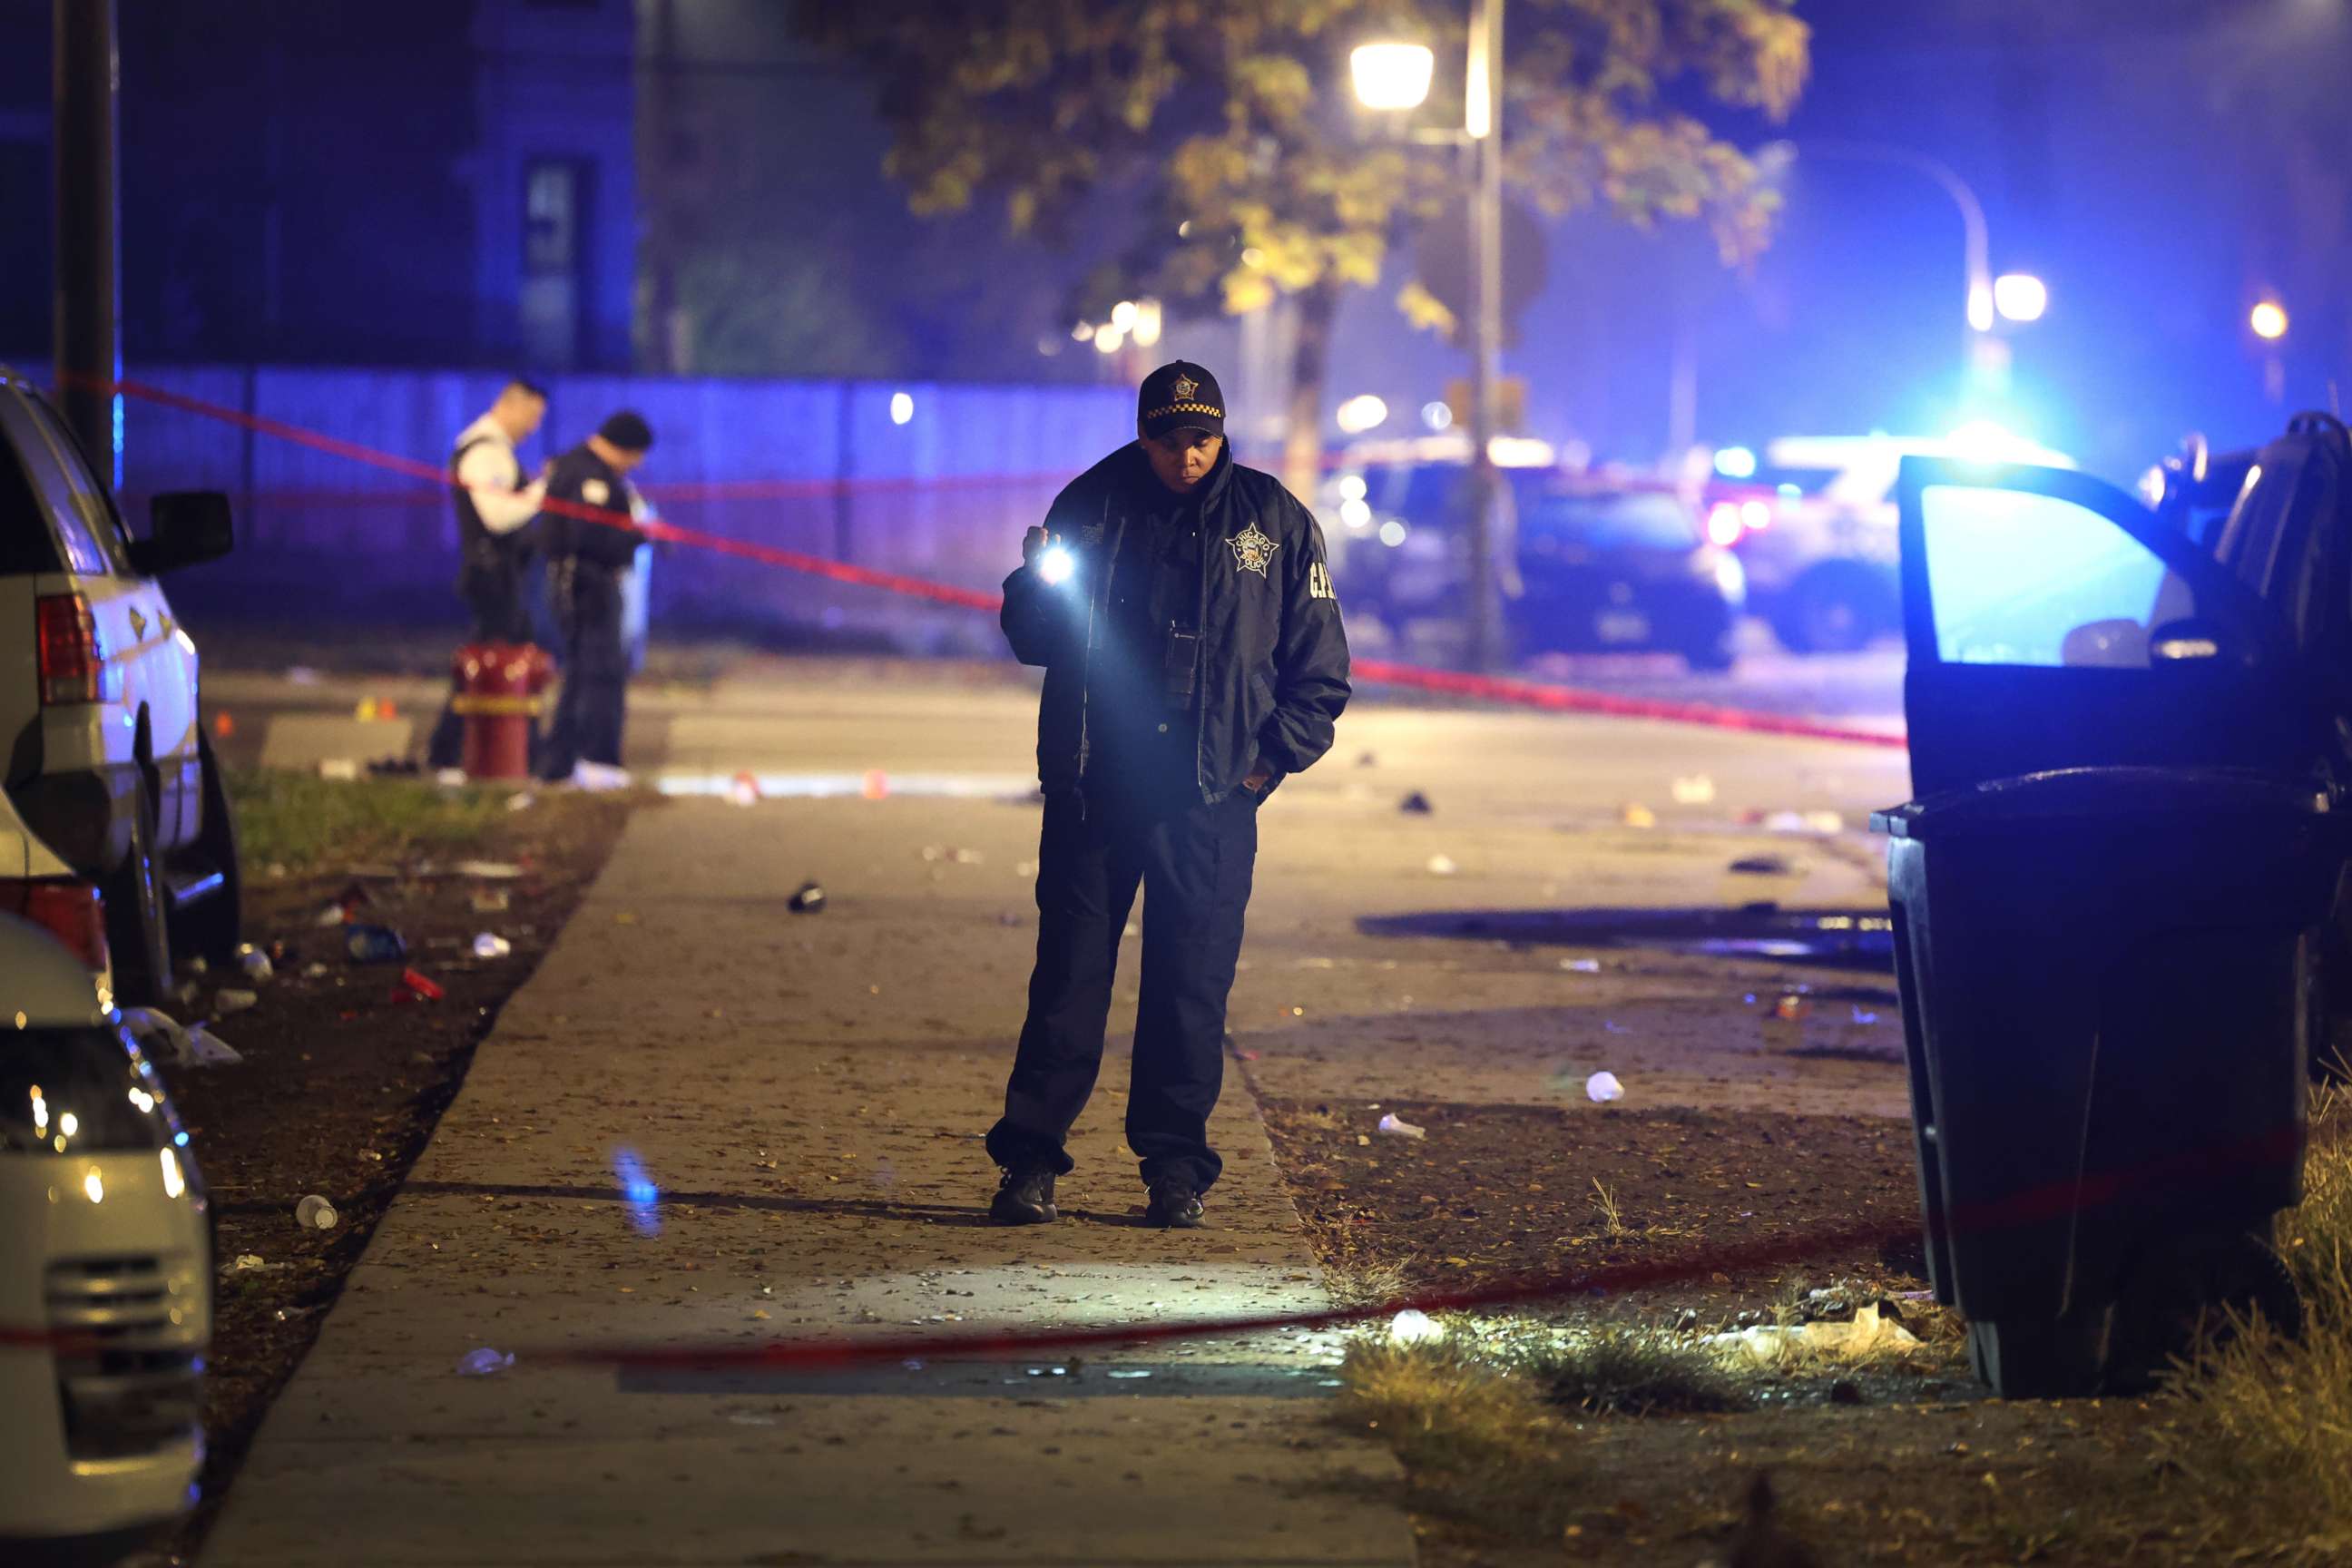 PHOTO: Police investigate the scene where as many as 14 people were said to have been shot on Oct. 31, 2022, in Chicago, Illinois.